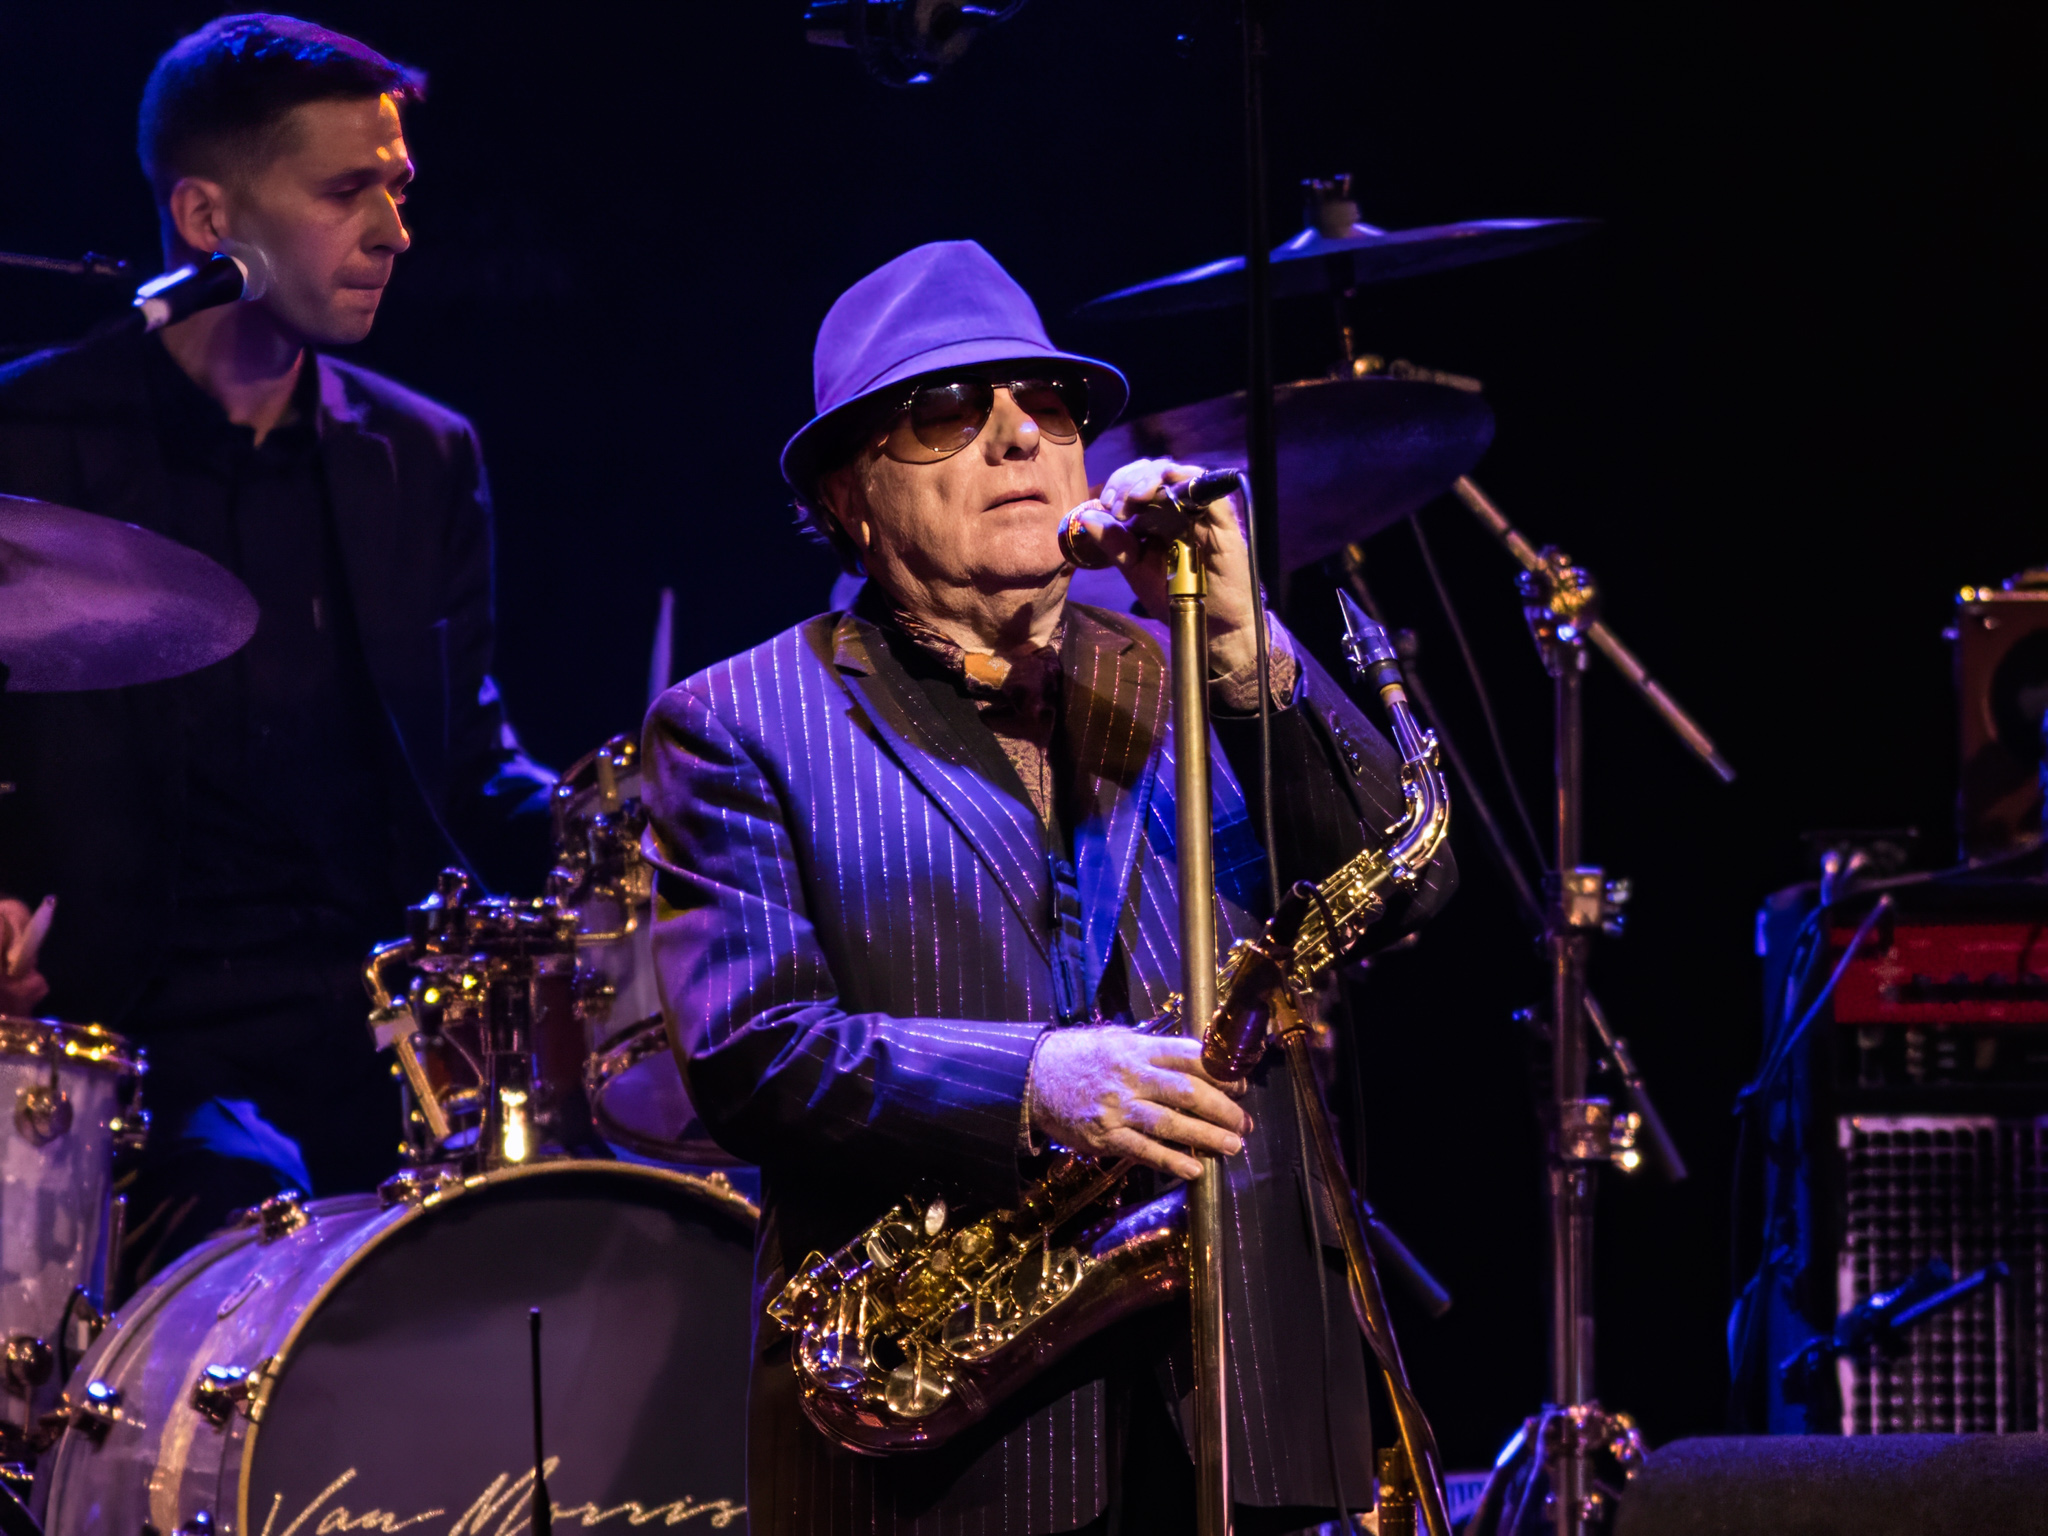 Van Morrison by Bullet-ray Photography